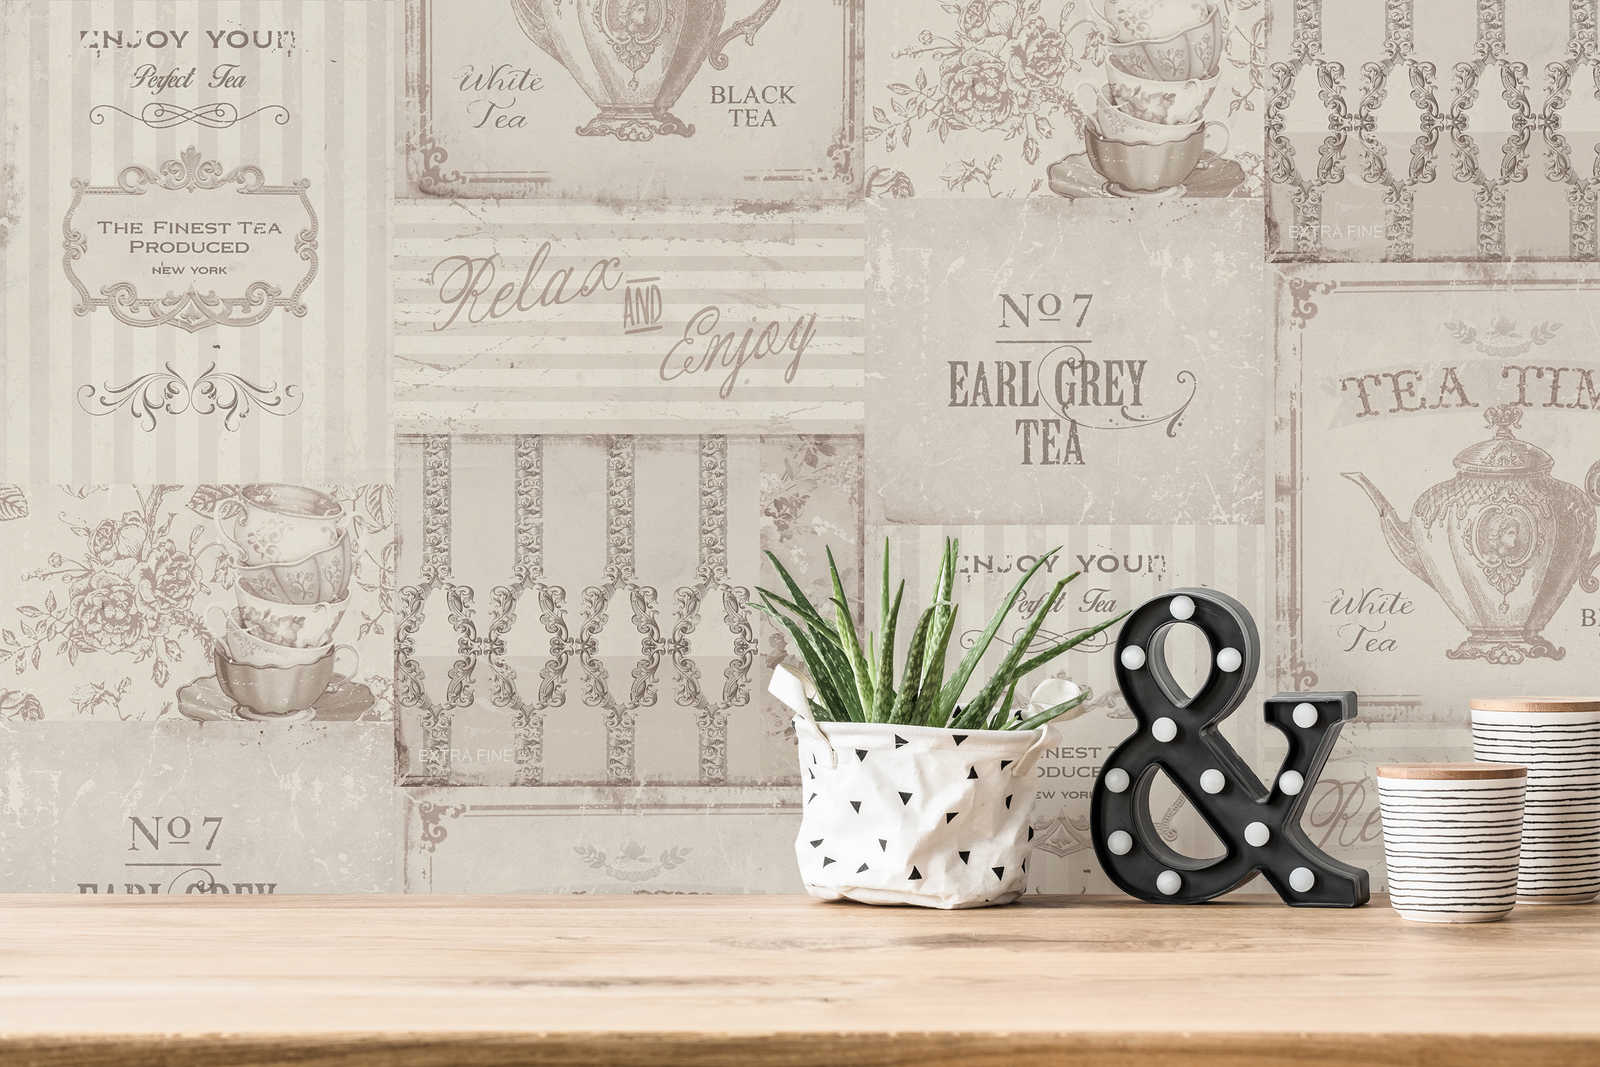             Pattern wallpaper Tea Time collage in country style - grey
        